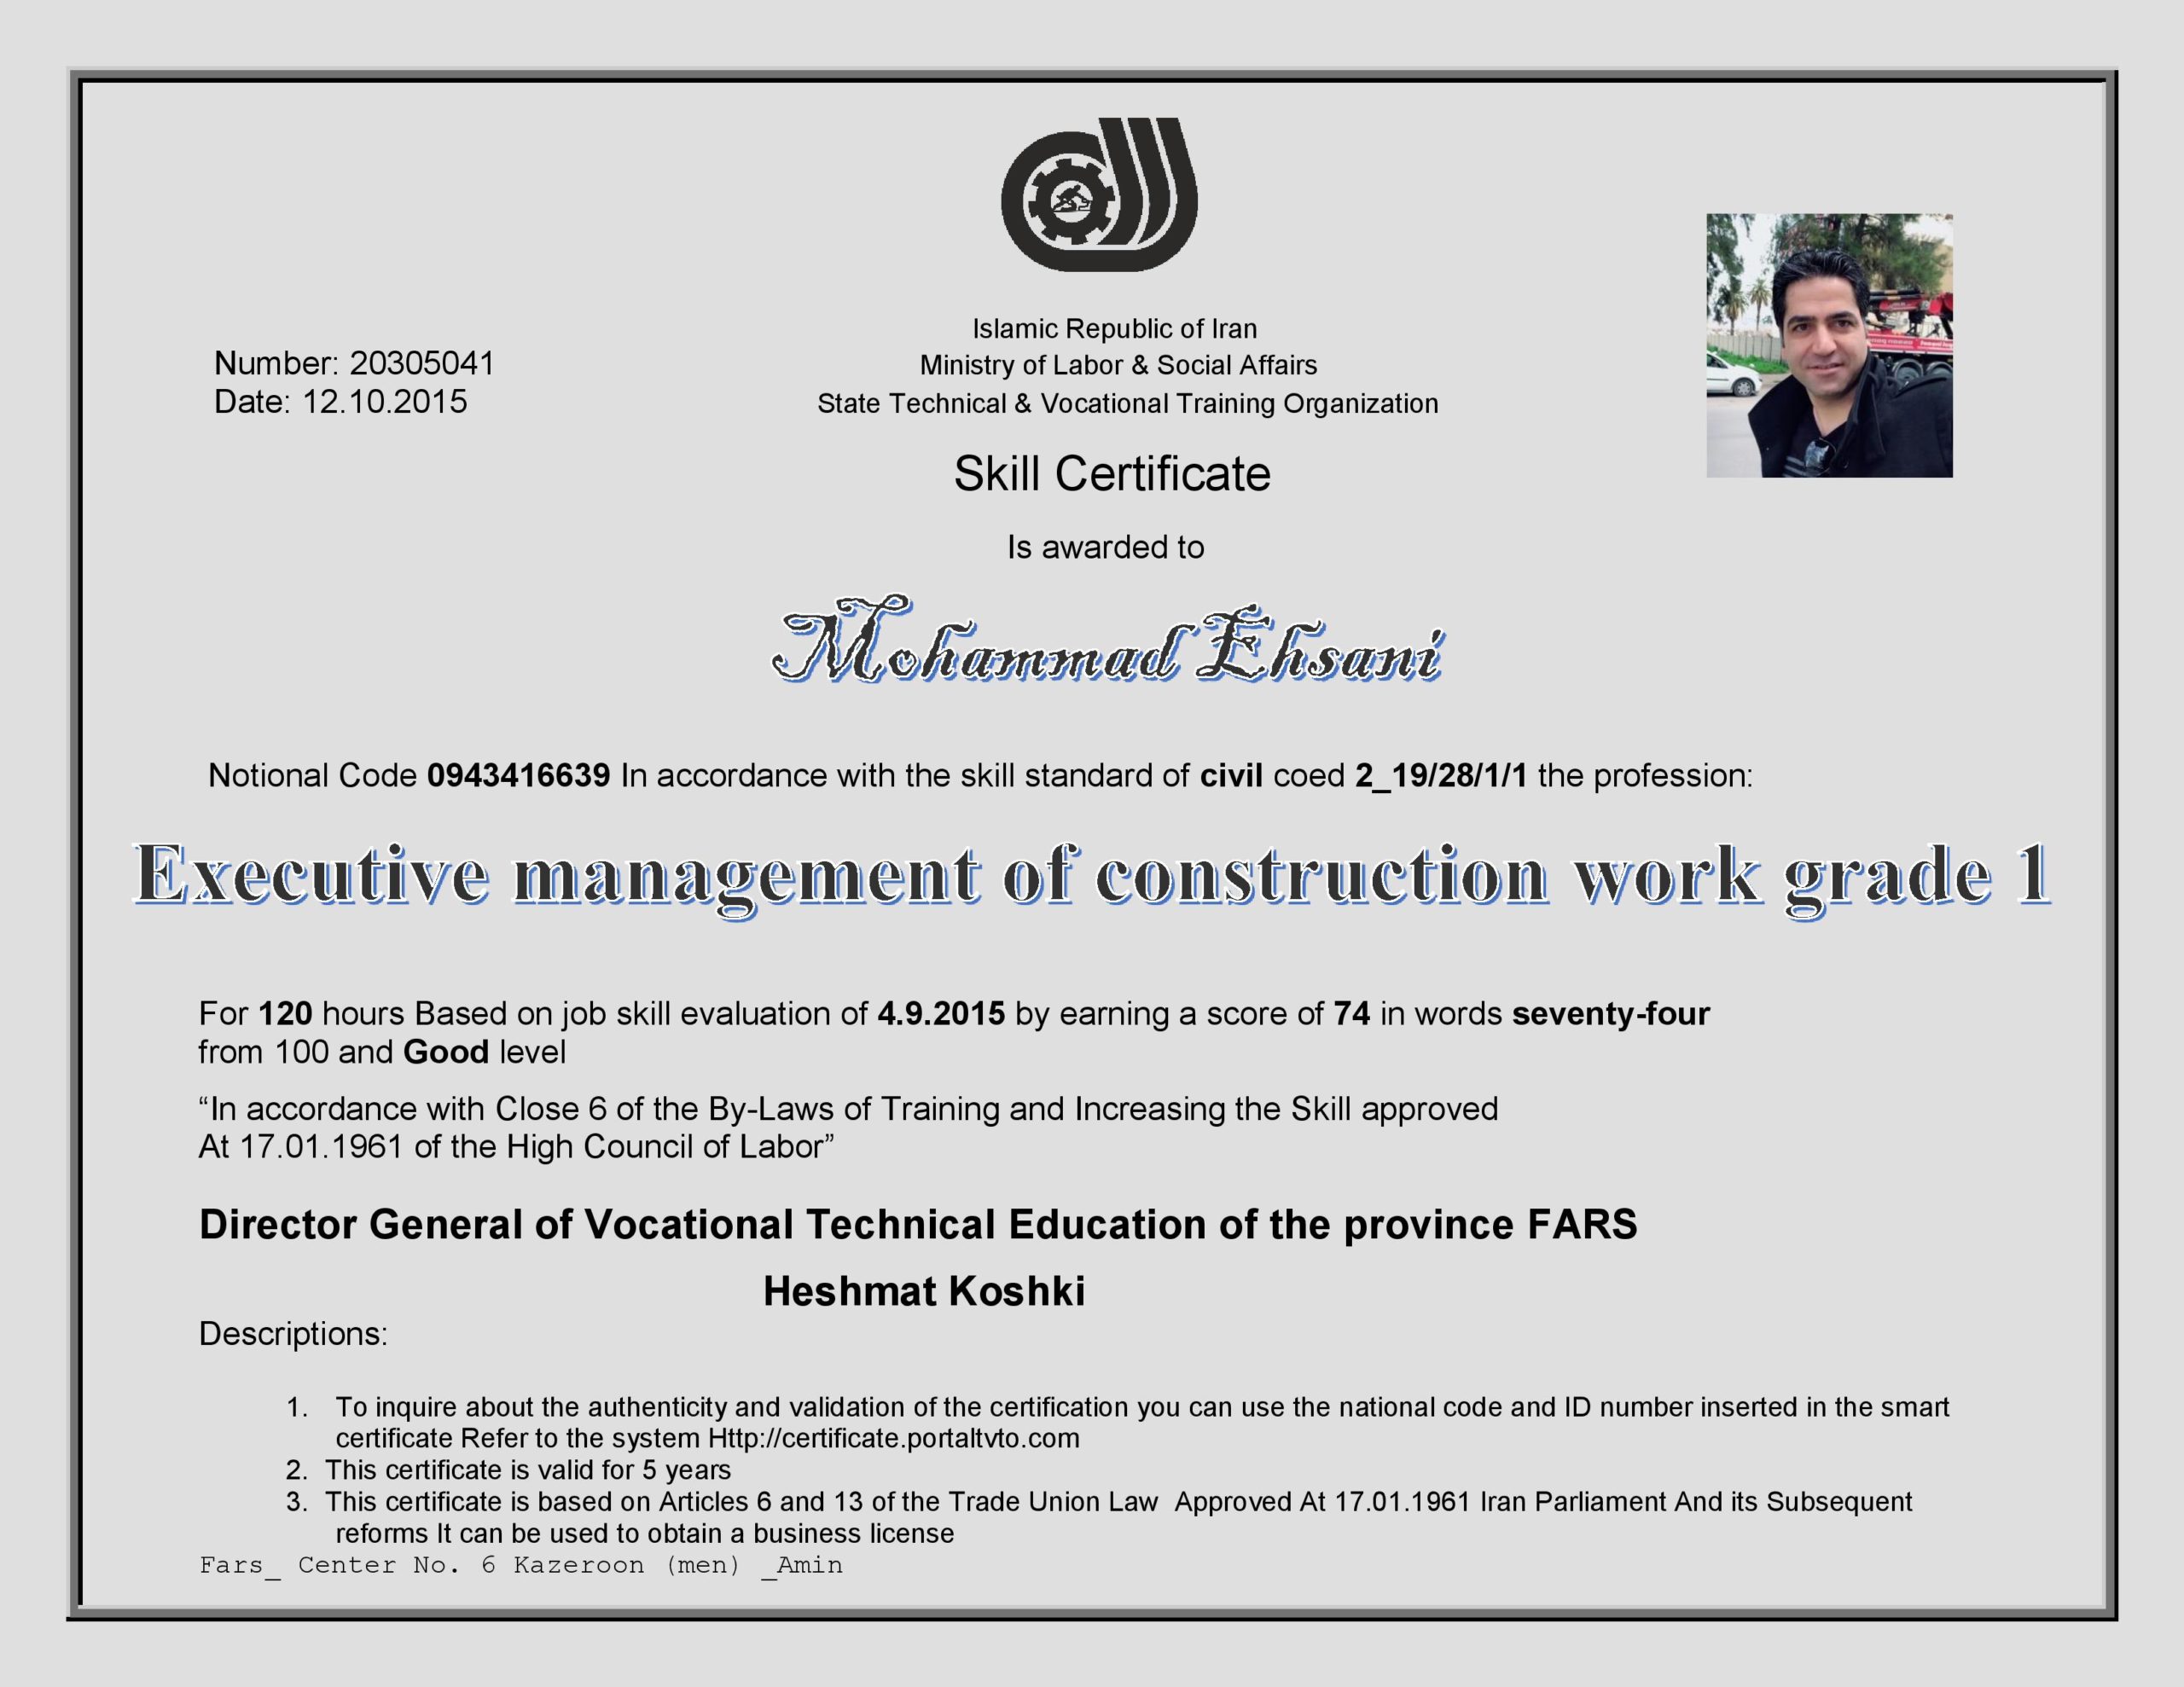 Mohammad Ehsani - Executive management of construction work grade 1